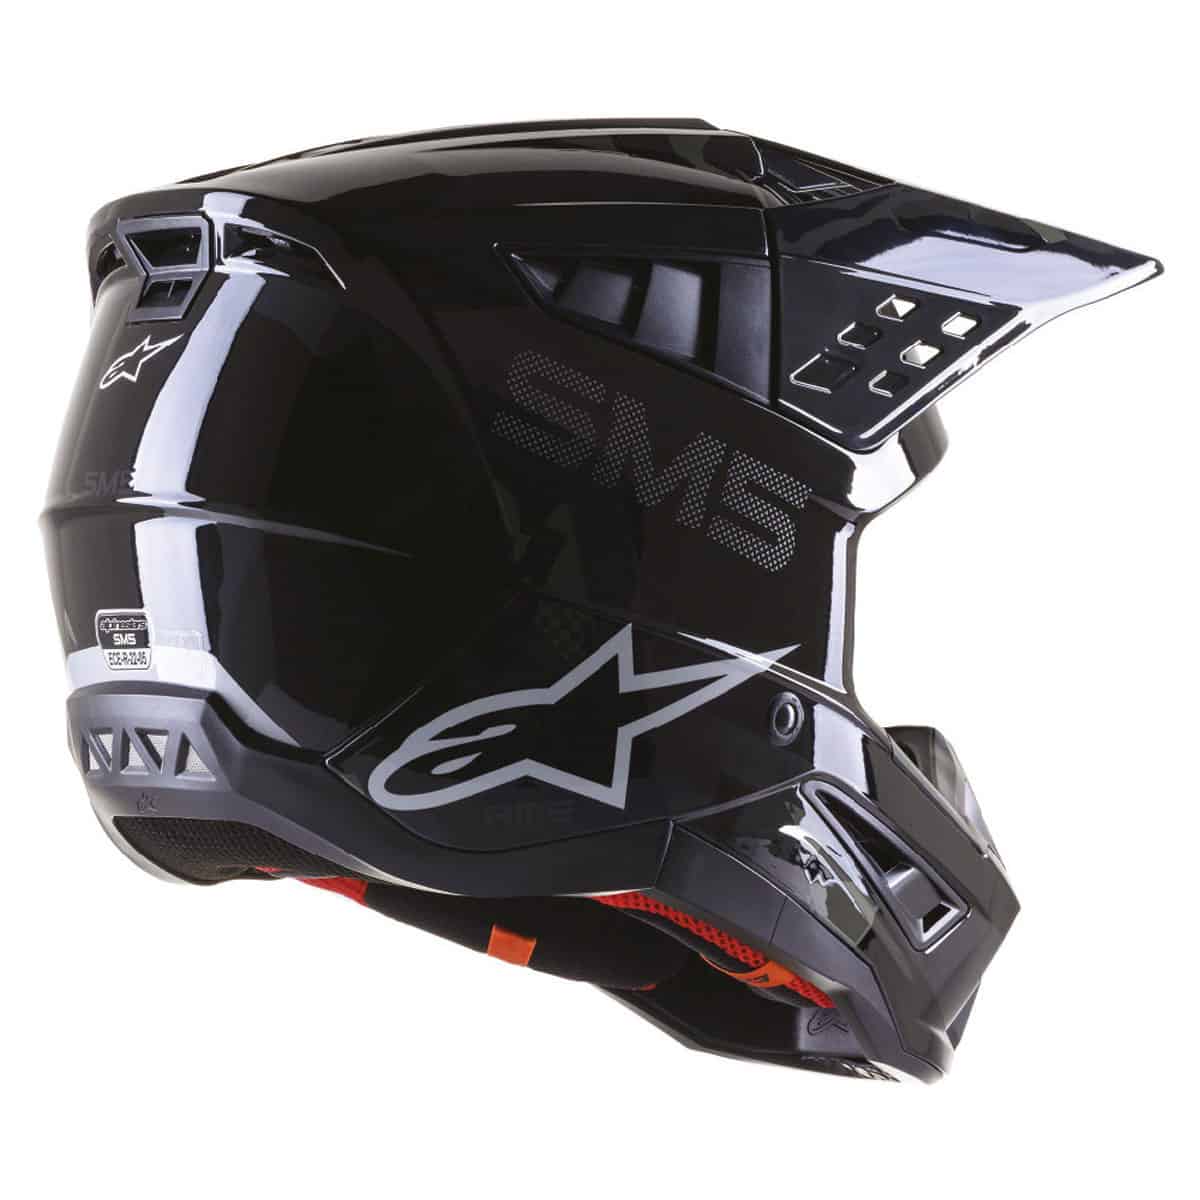 The masters of MX protection have crafted the ultimate MX Helmet: The Alpinestars SM5